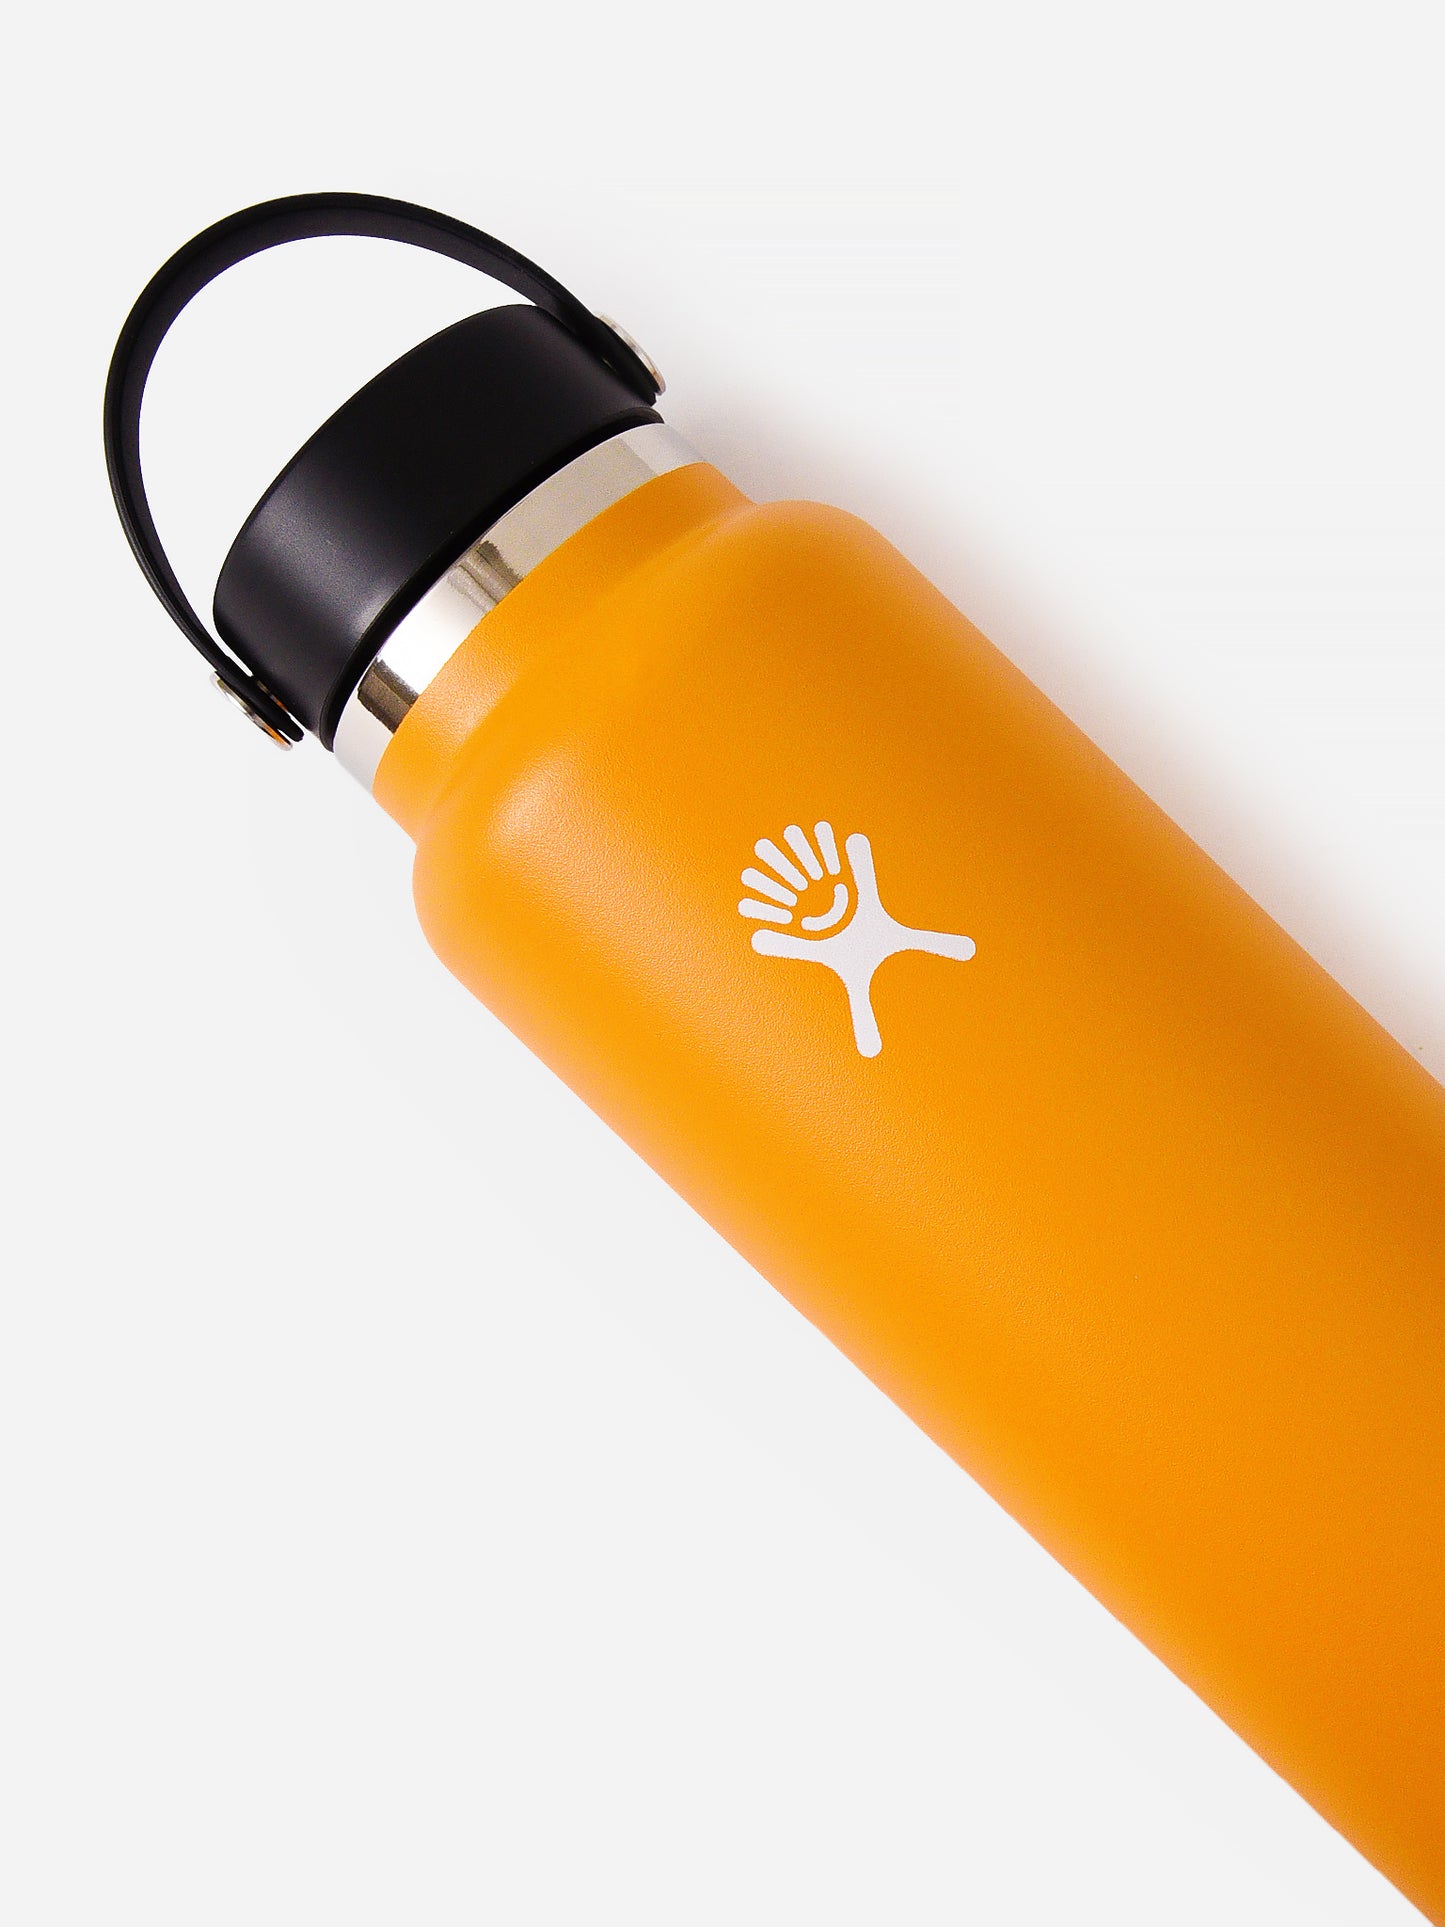 Hydroflask Wide Mouth 40oz Water Bottle